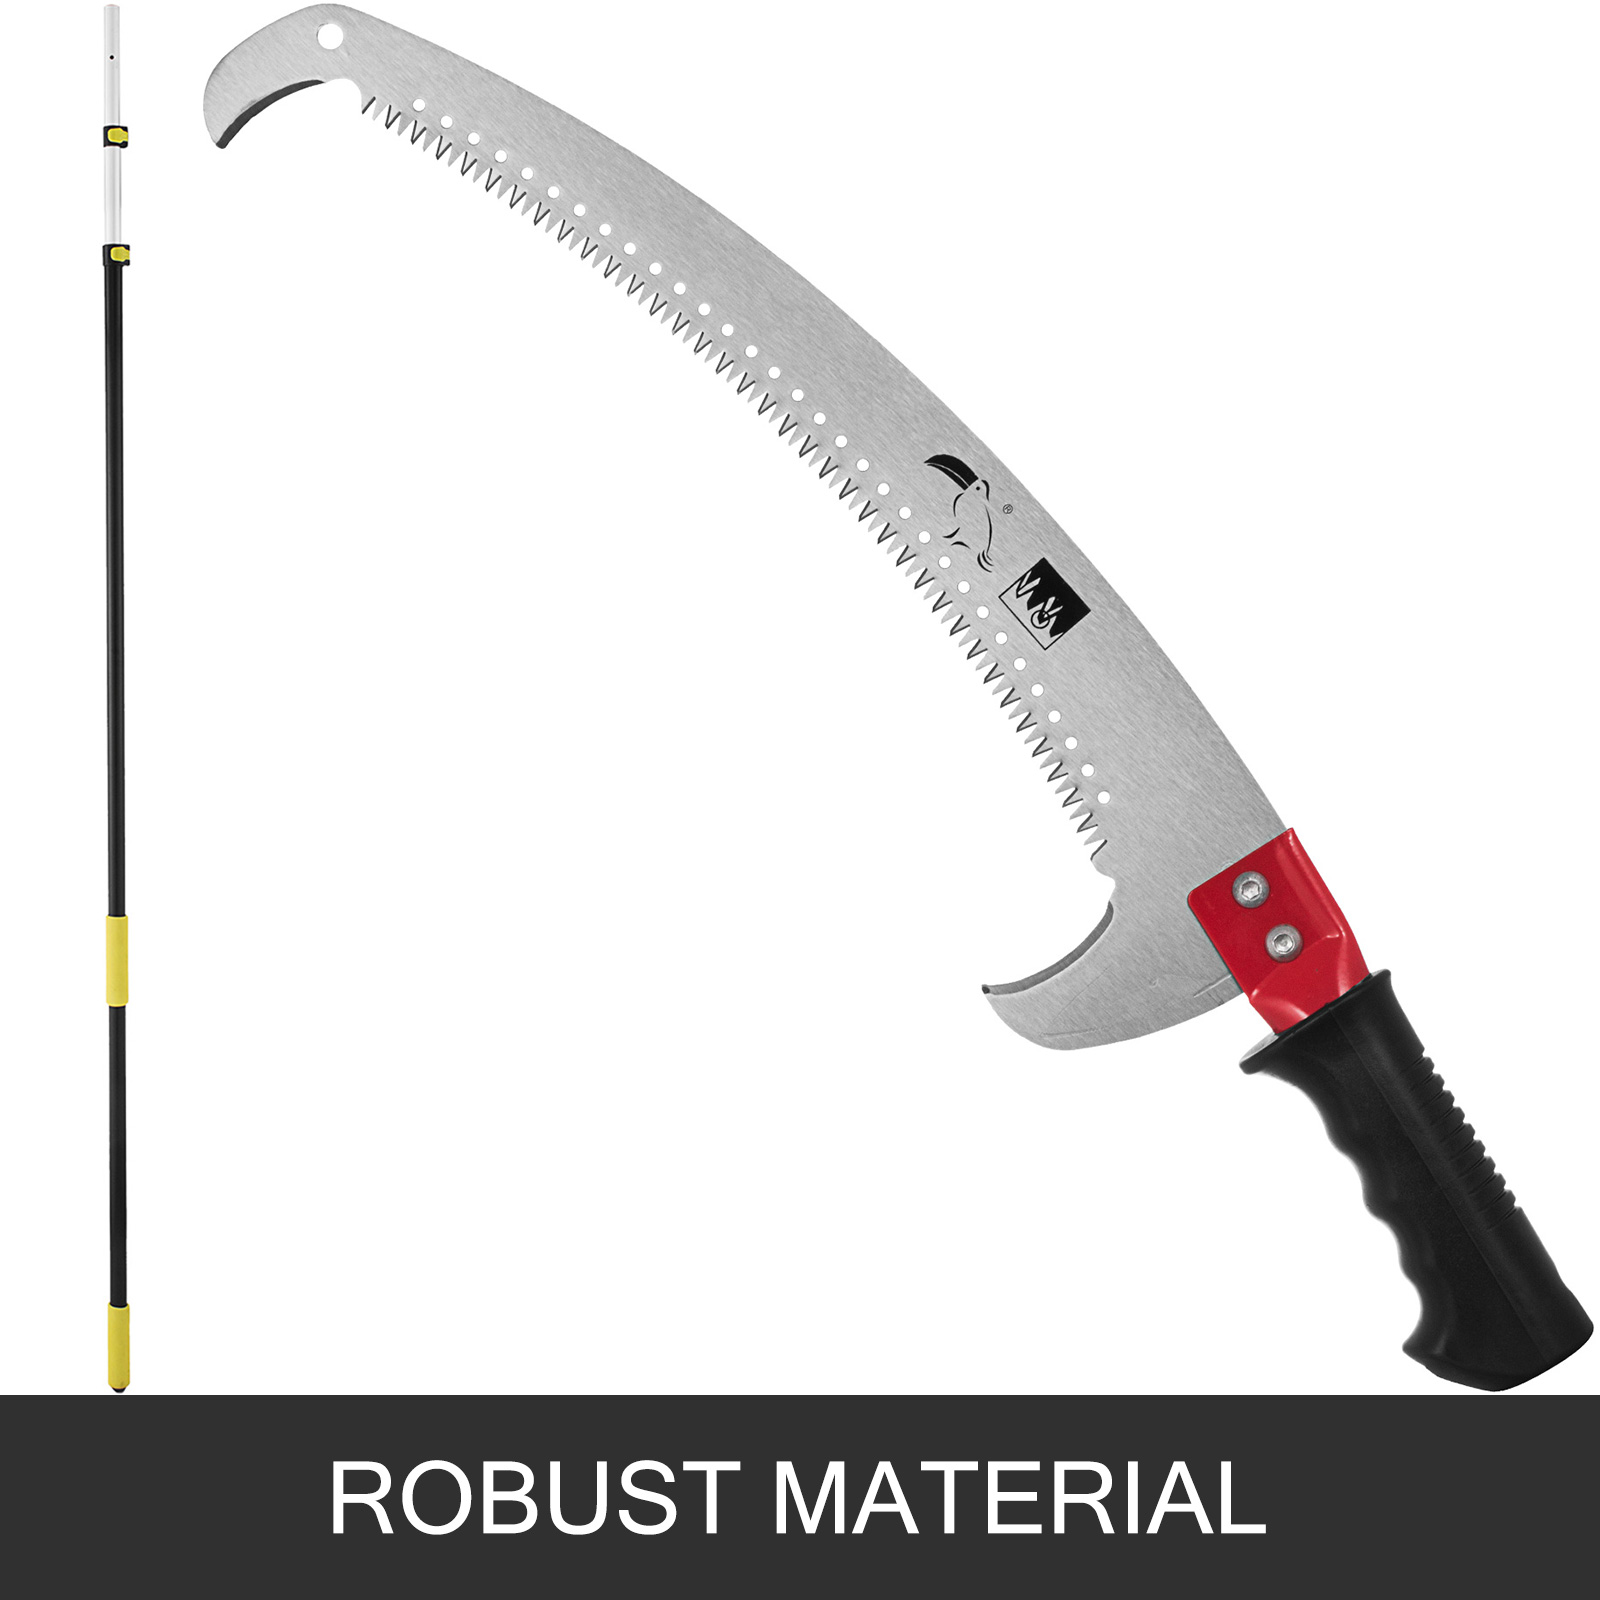 Barnel Tools 19ft Telescopic Pole Saw Long Reach Extendable Cuts Branches Trees.